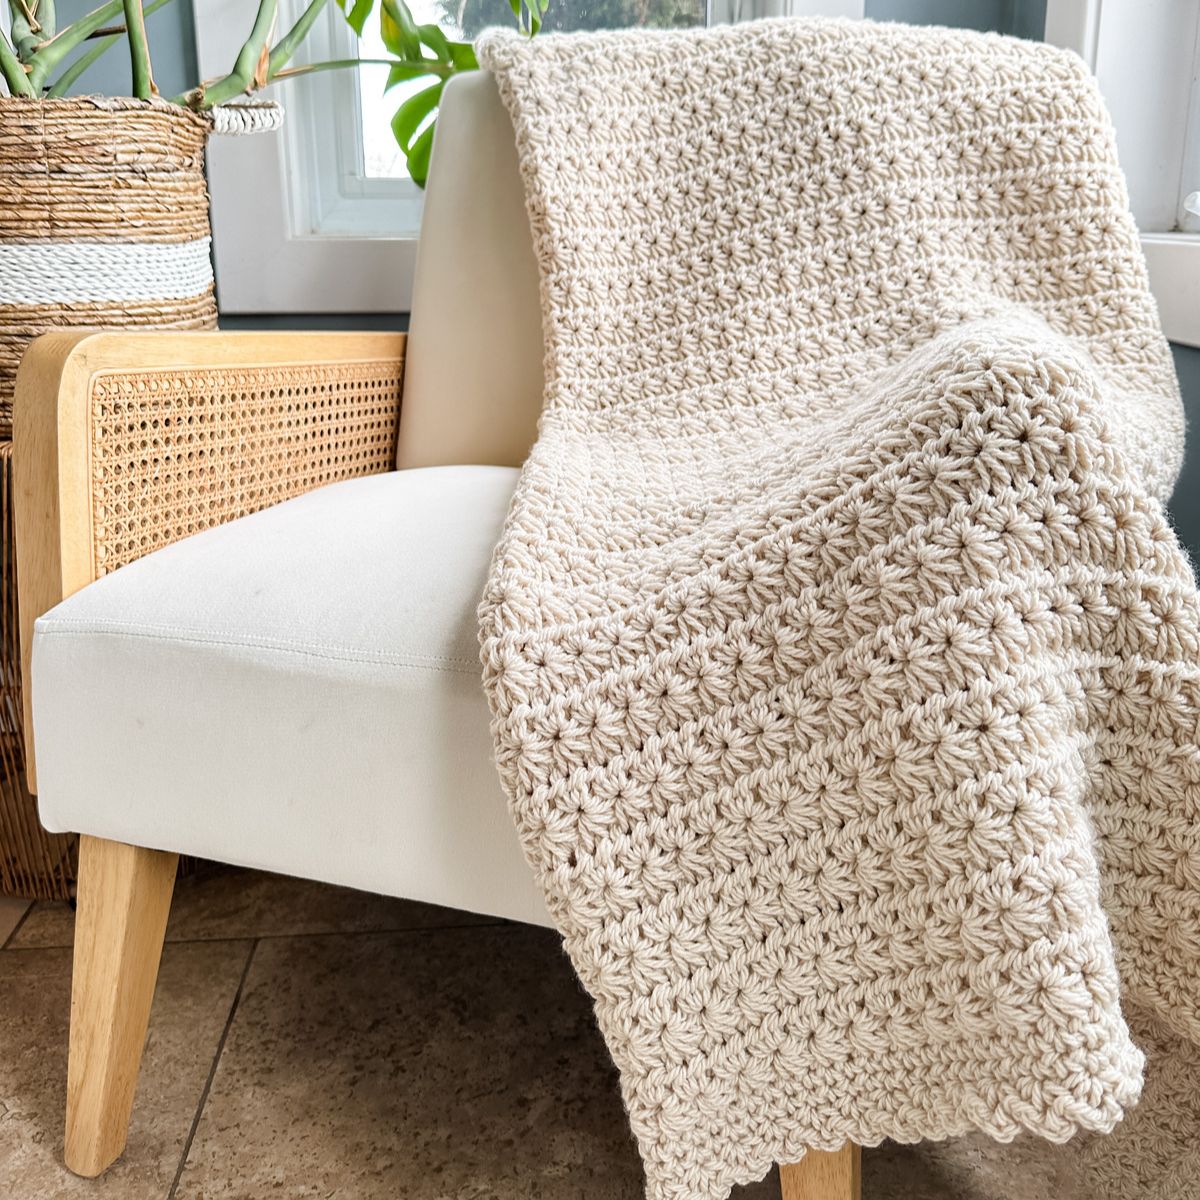 Crochet Blanket Styles and Stitches